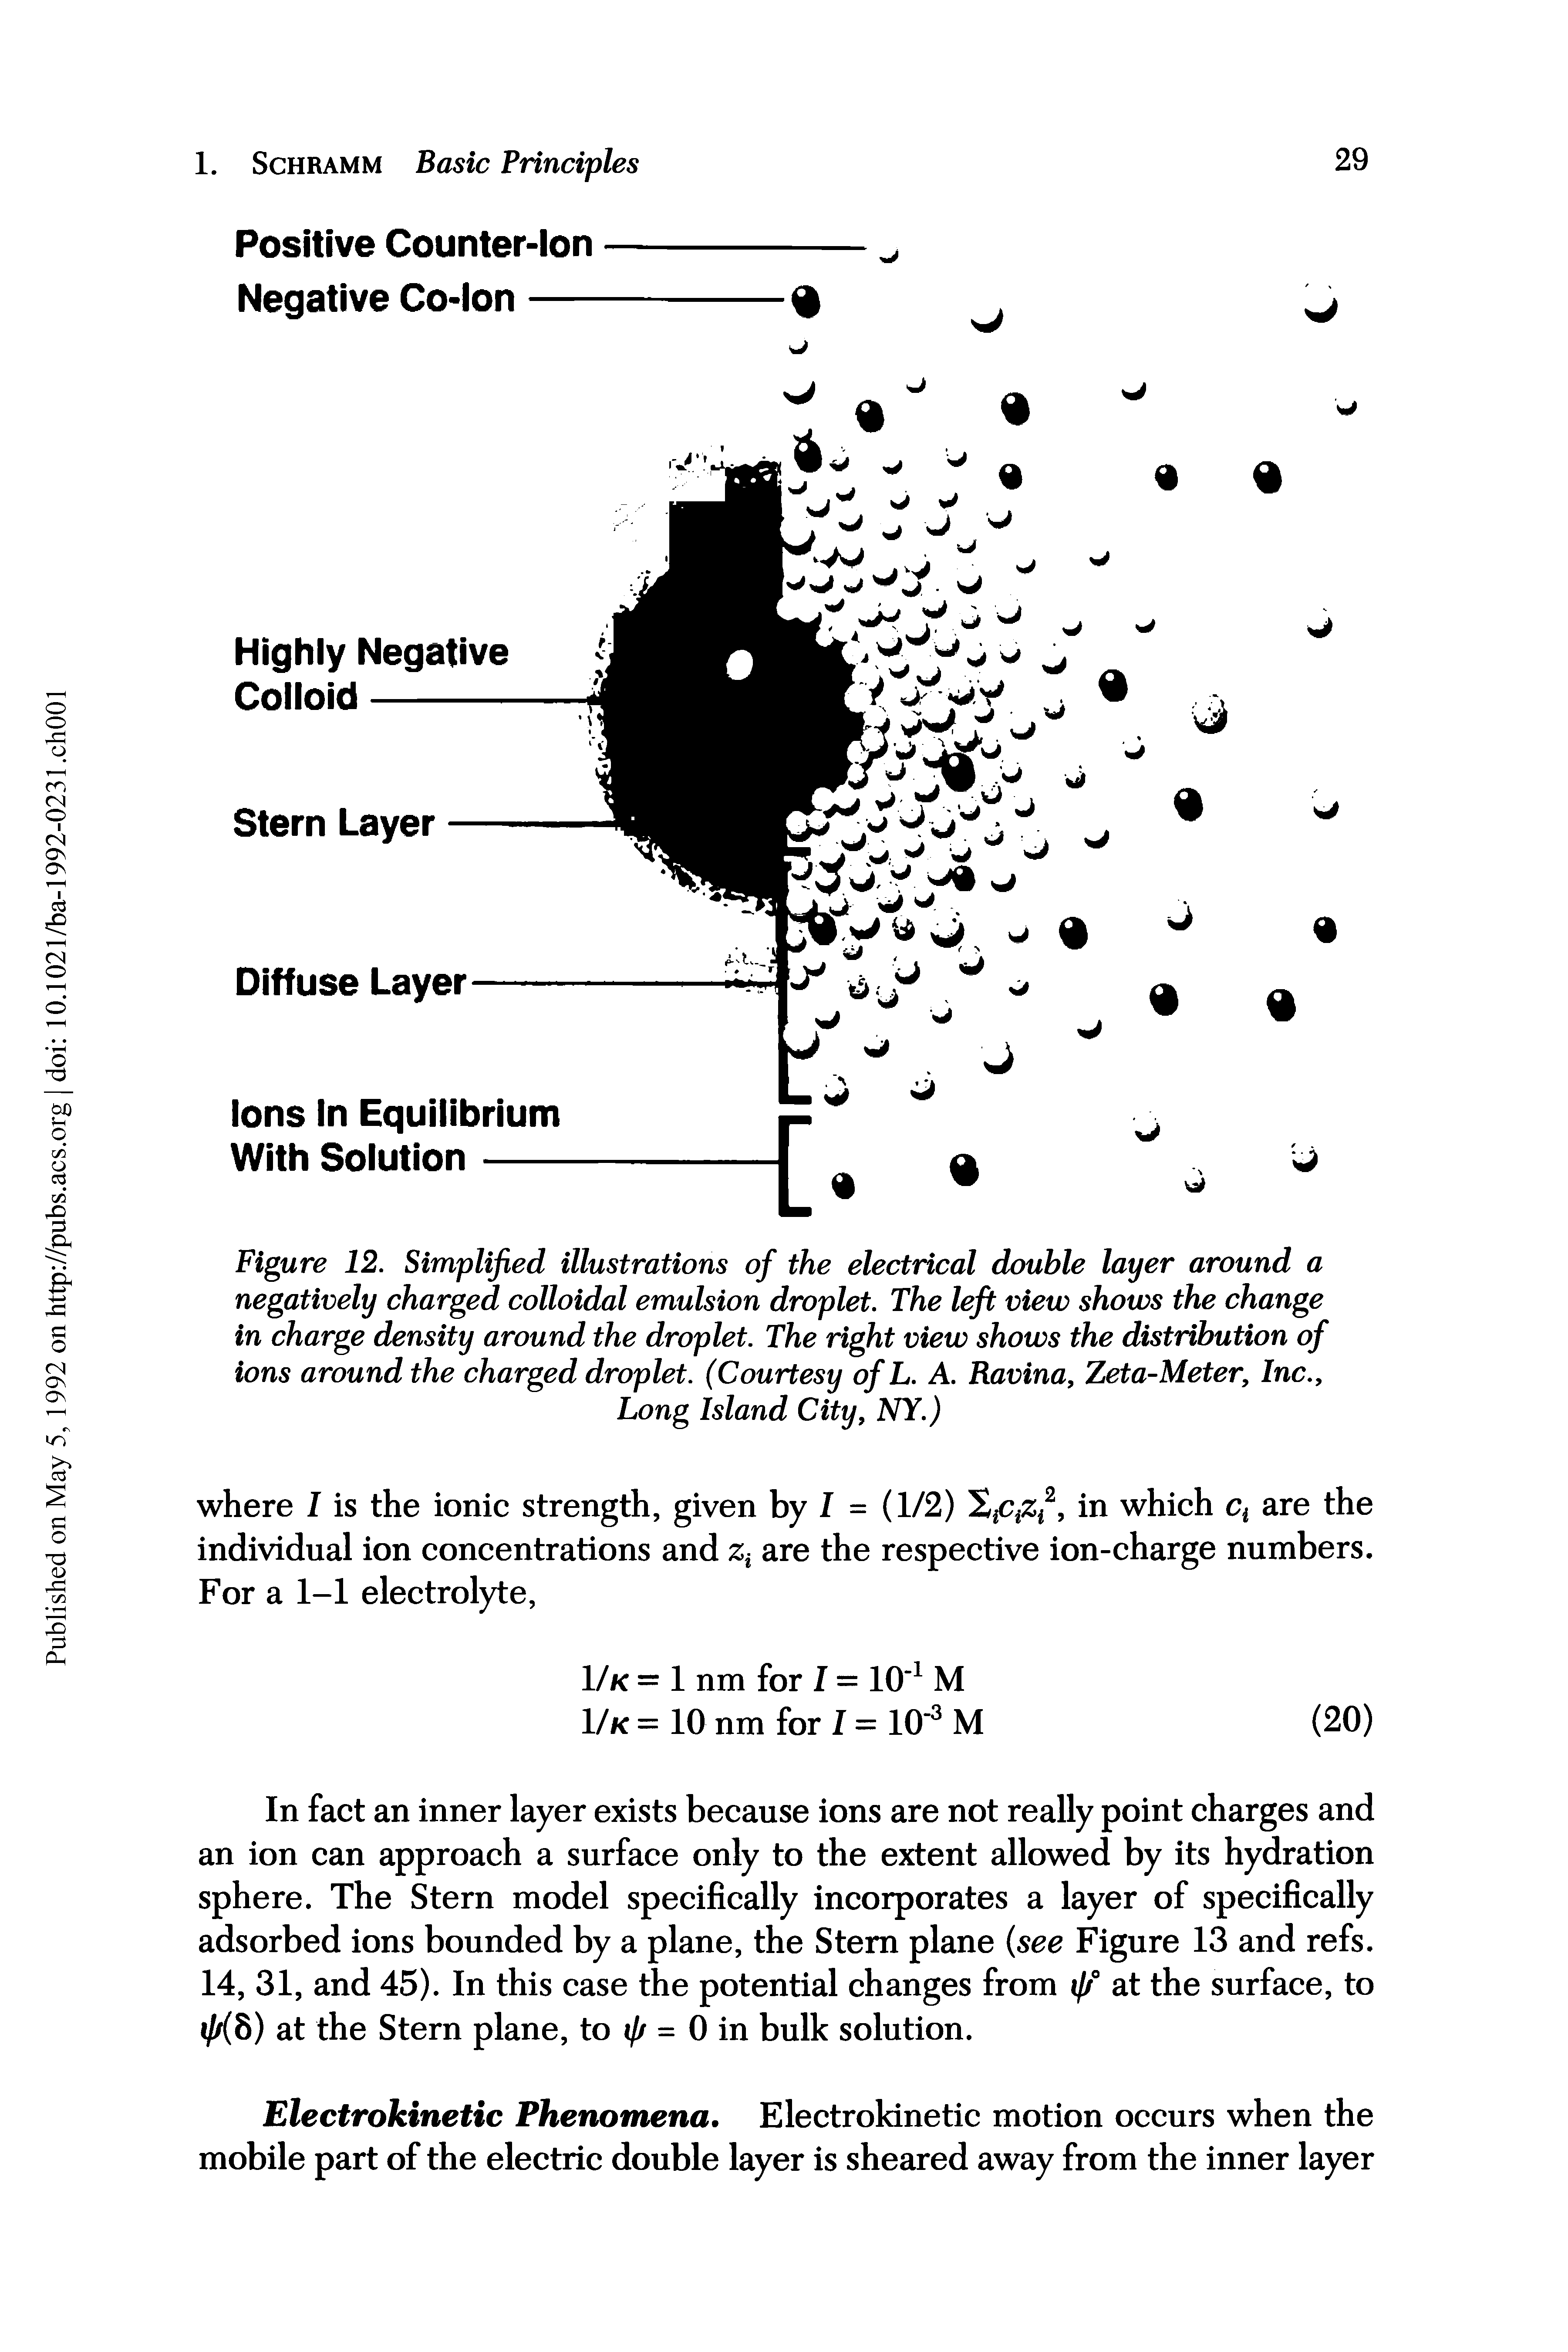 Figure 12. Simplified illustrations of the electrical double layer around a negatively charged colloidal emulsion droplet. The left view shows the change in charge density around the droplet. The right view shows the distribution of ions around the charged droplet. (Courtesy of L. A. Ravina, Zeta-Meter, Inc., Long Island City, NY.)...